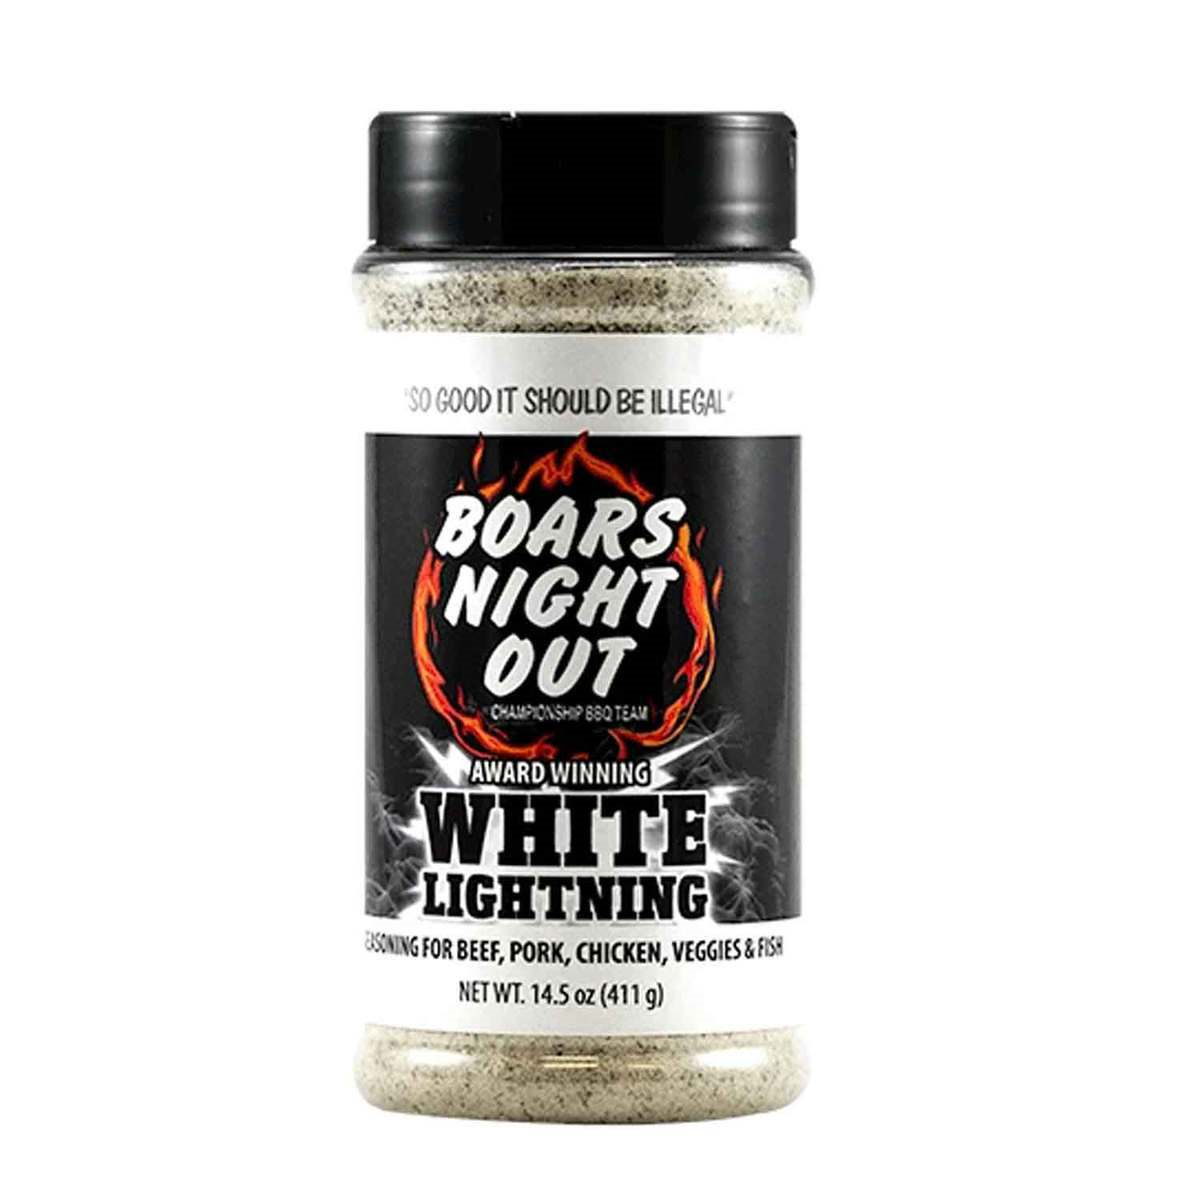 Boar’s Night Out – White Lightning